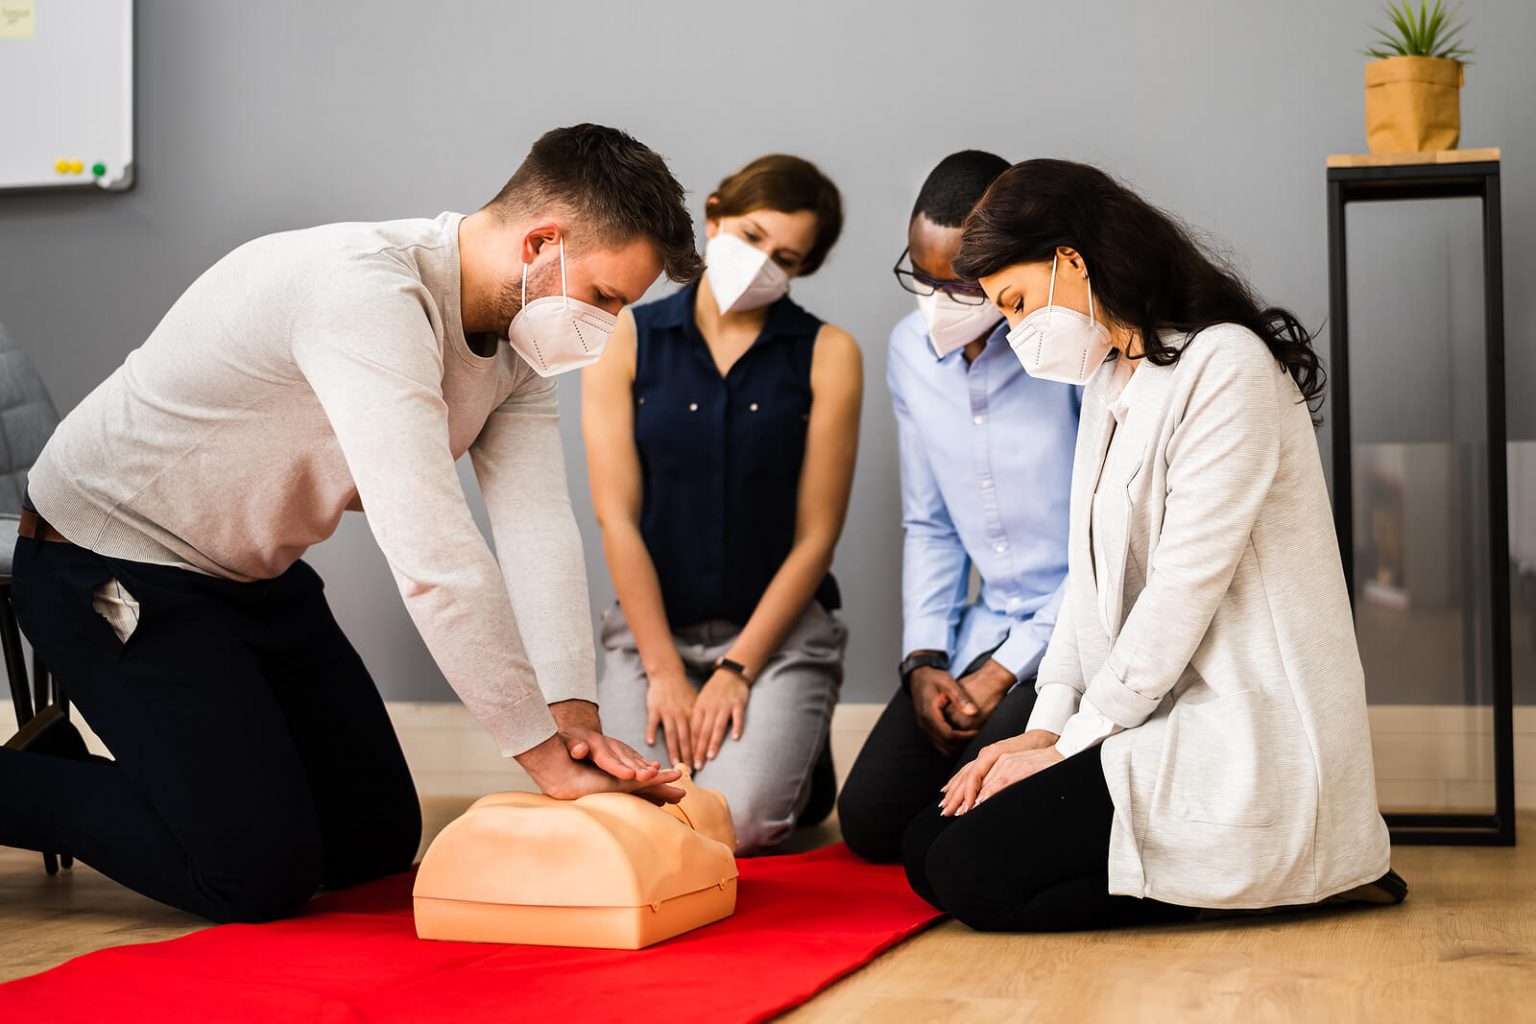 Group CPR training class